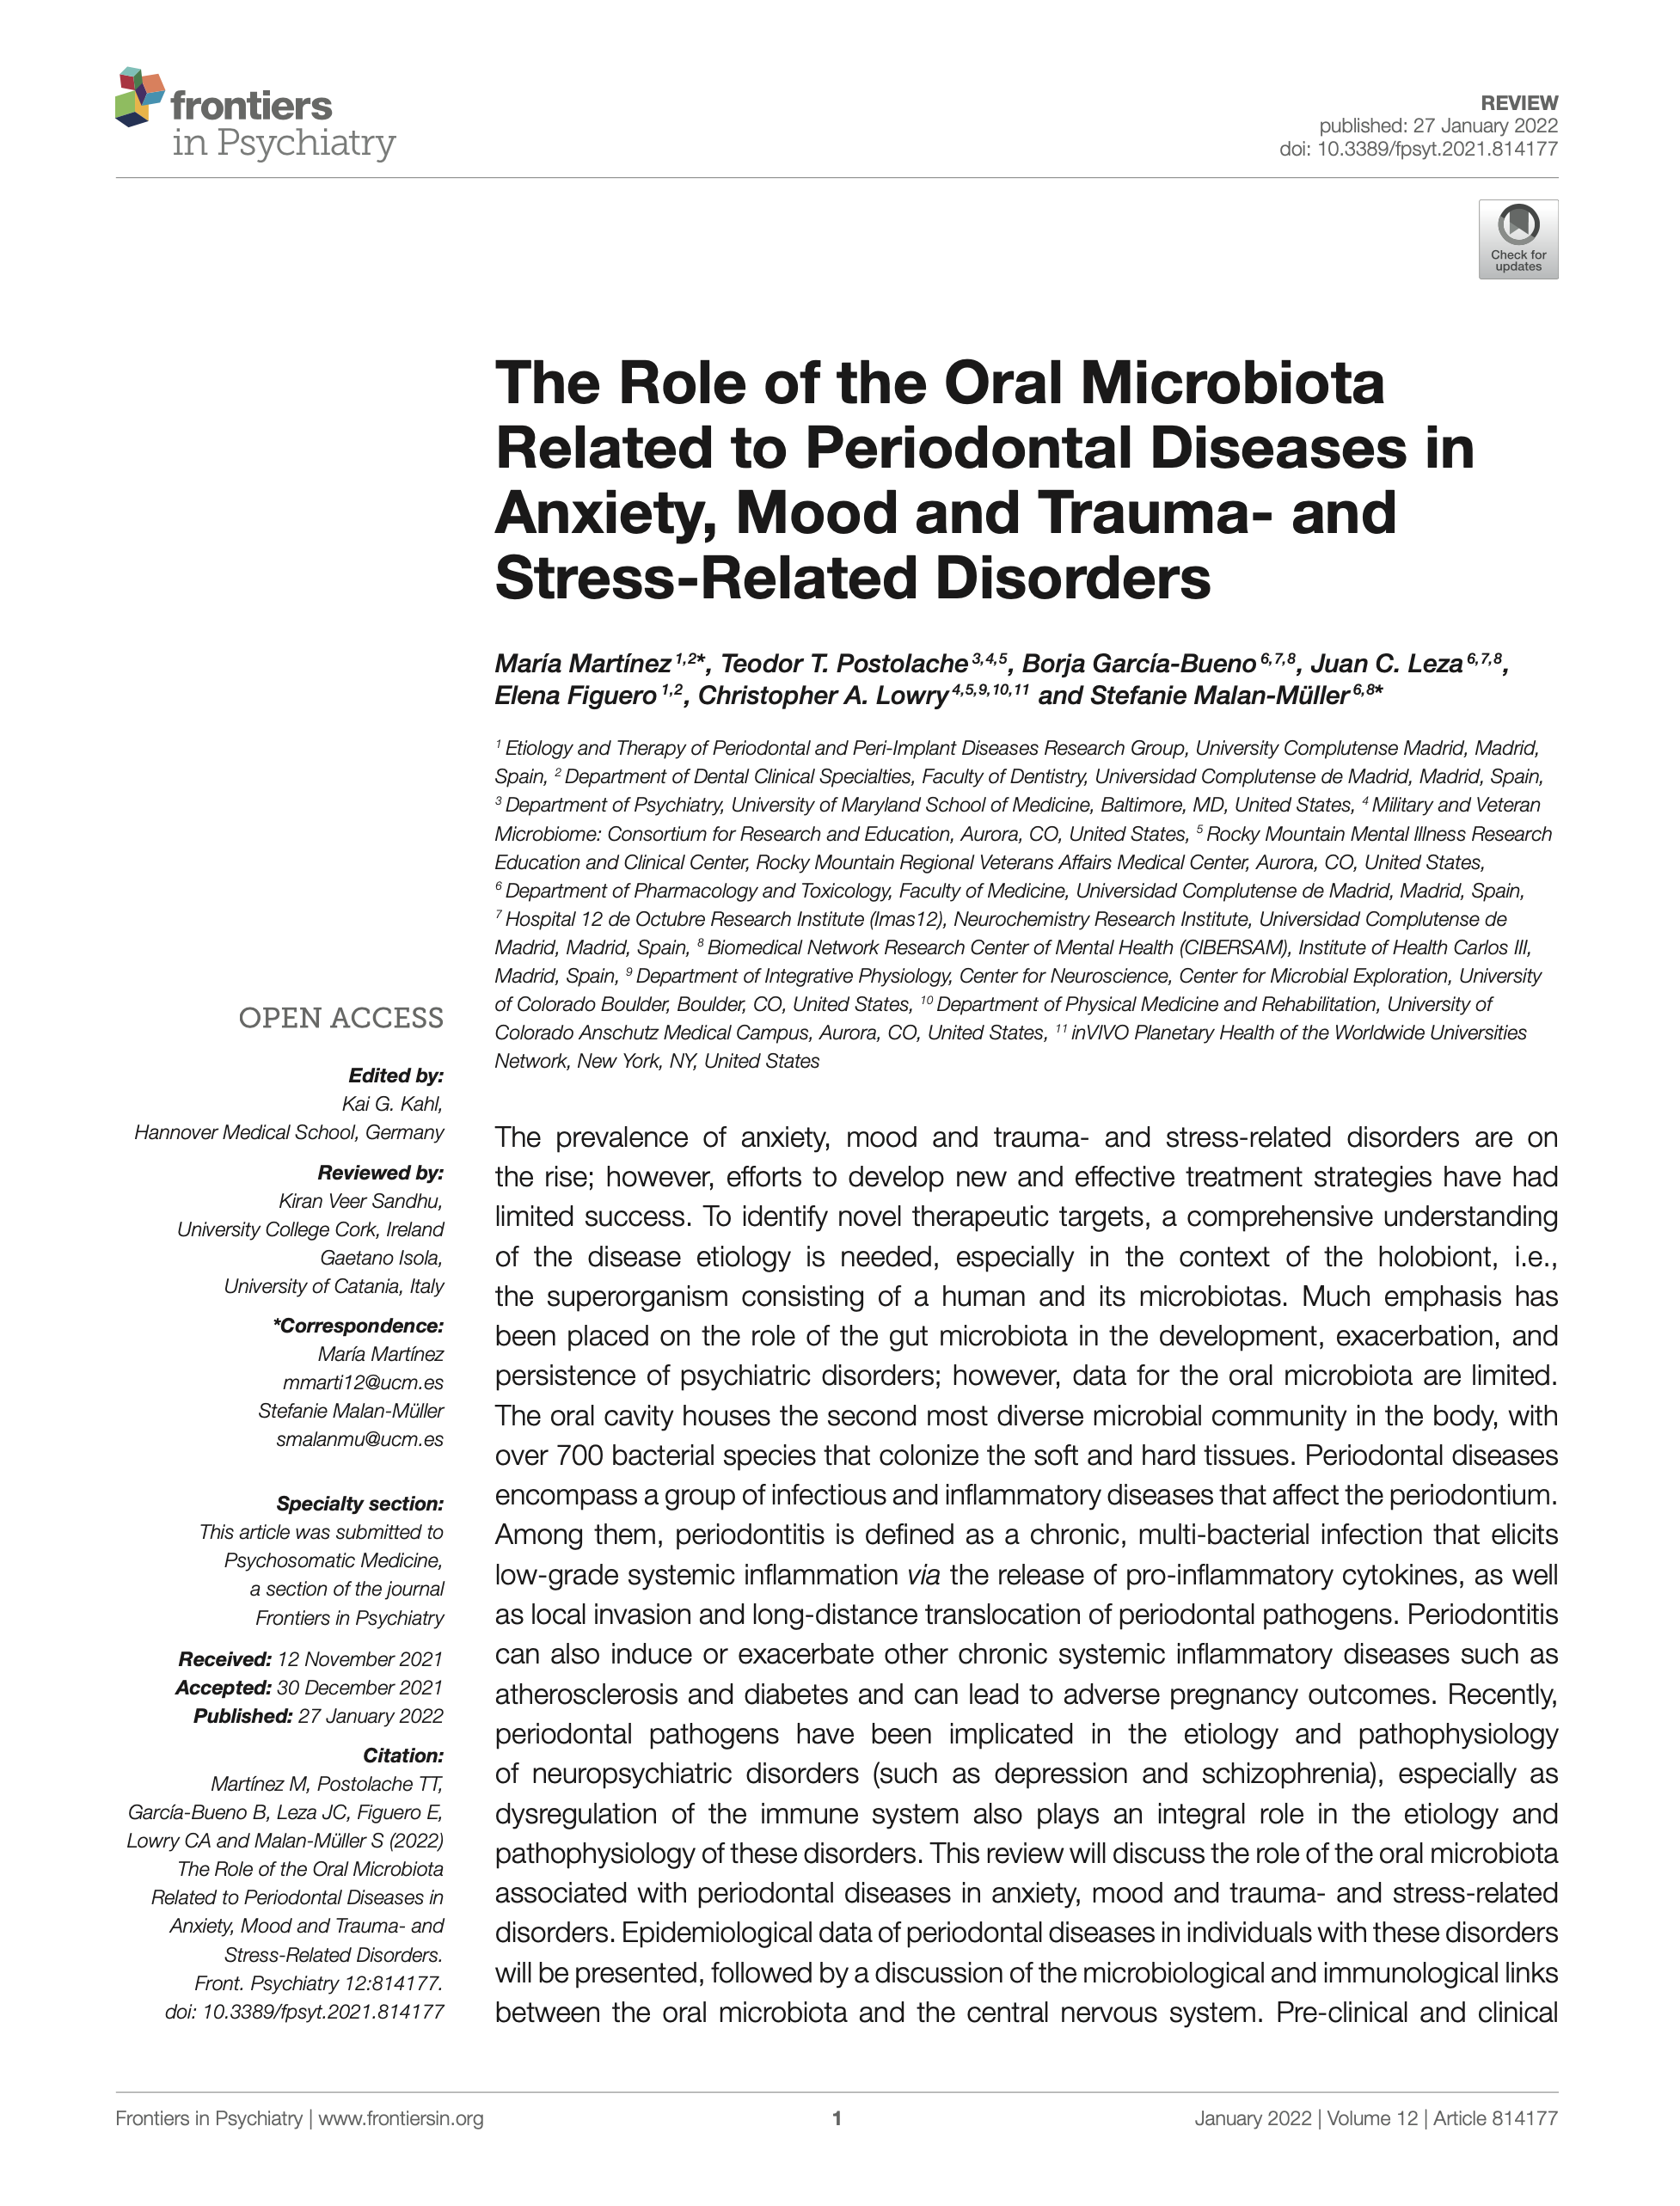 The Role of the Oral Microbiota Related to Periodontal Diseases in Anxiety Mood and Trauma- and Stress-Related Disorders